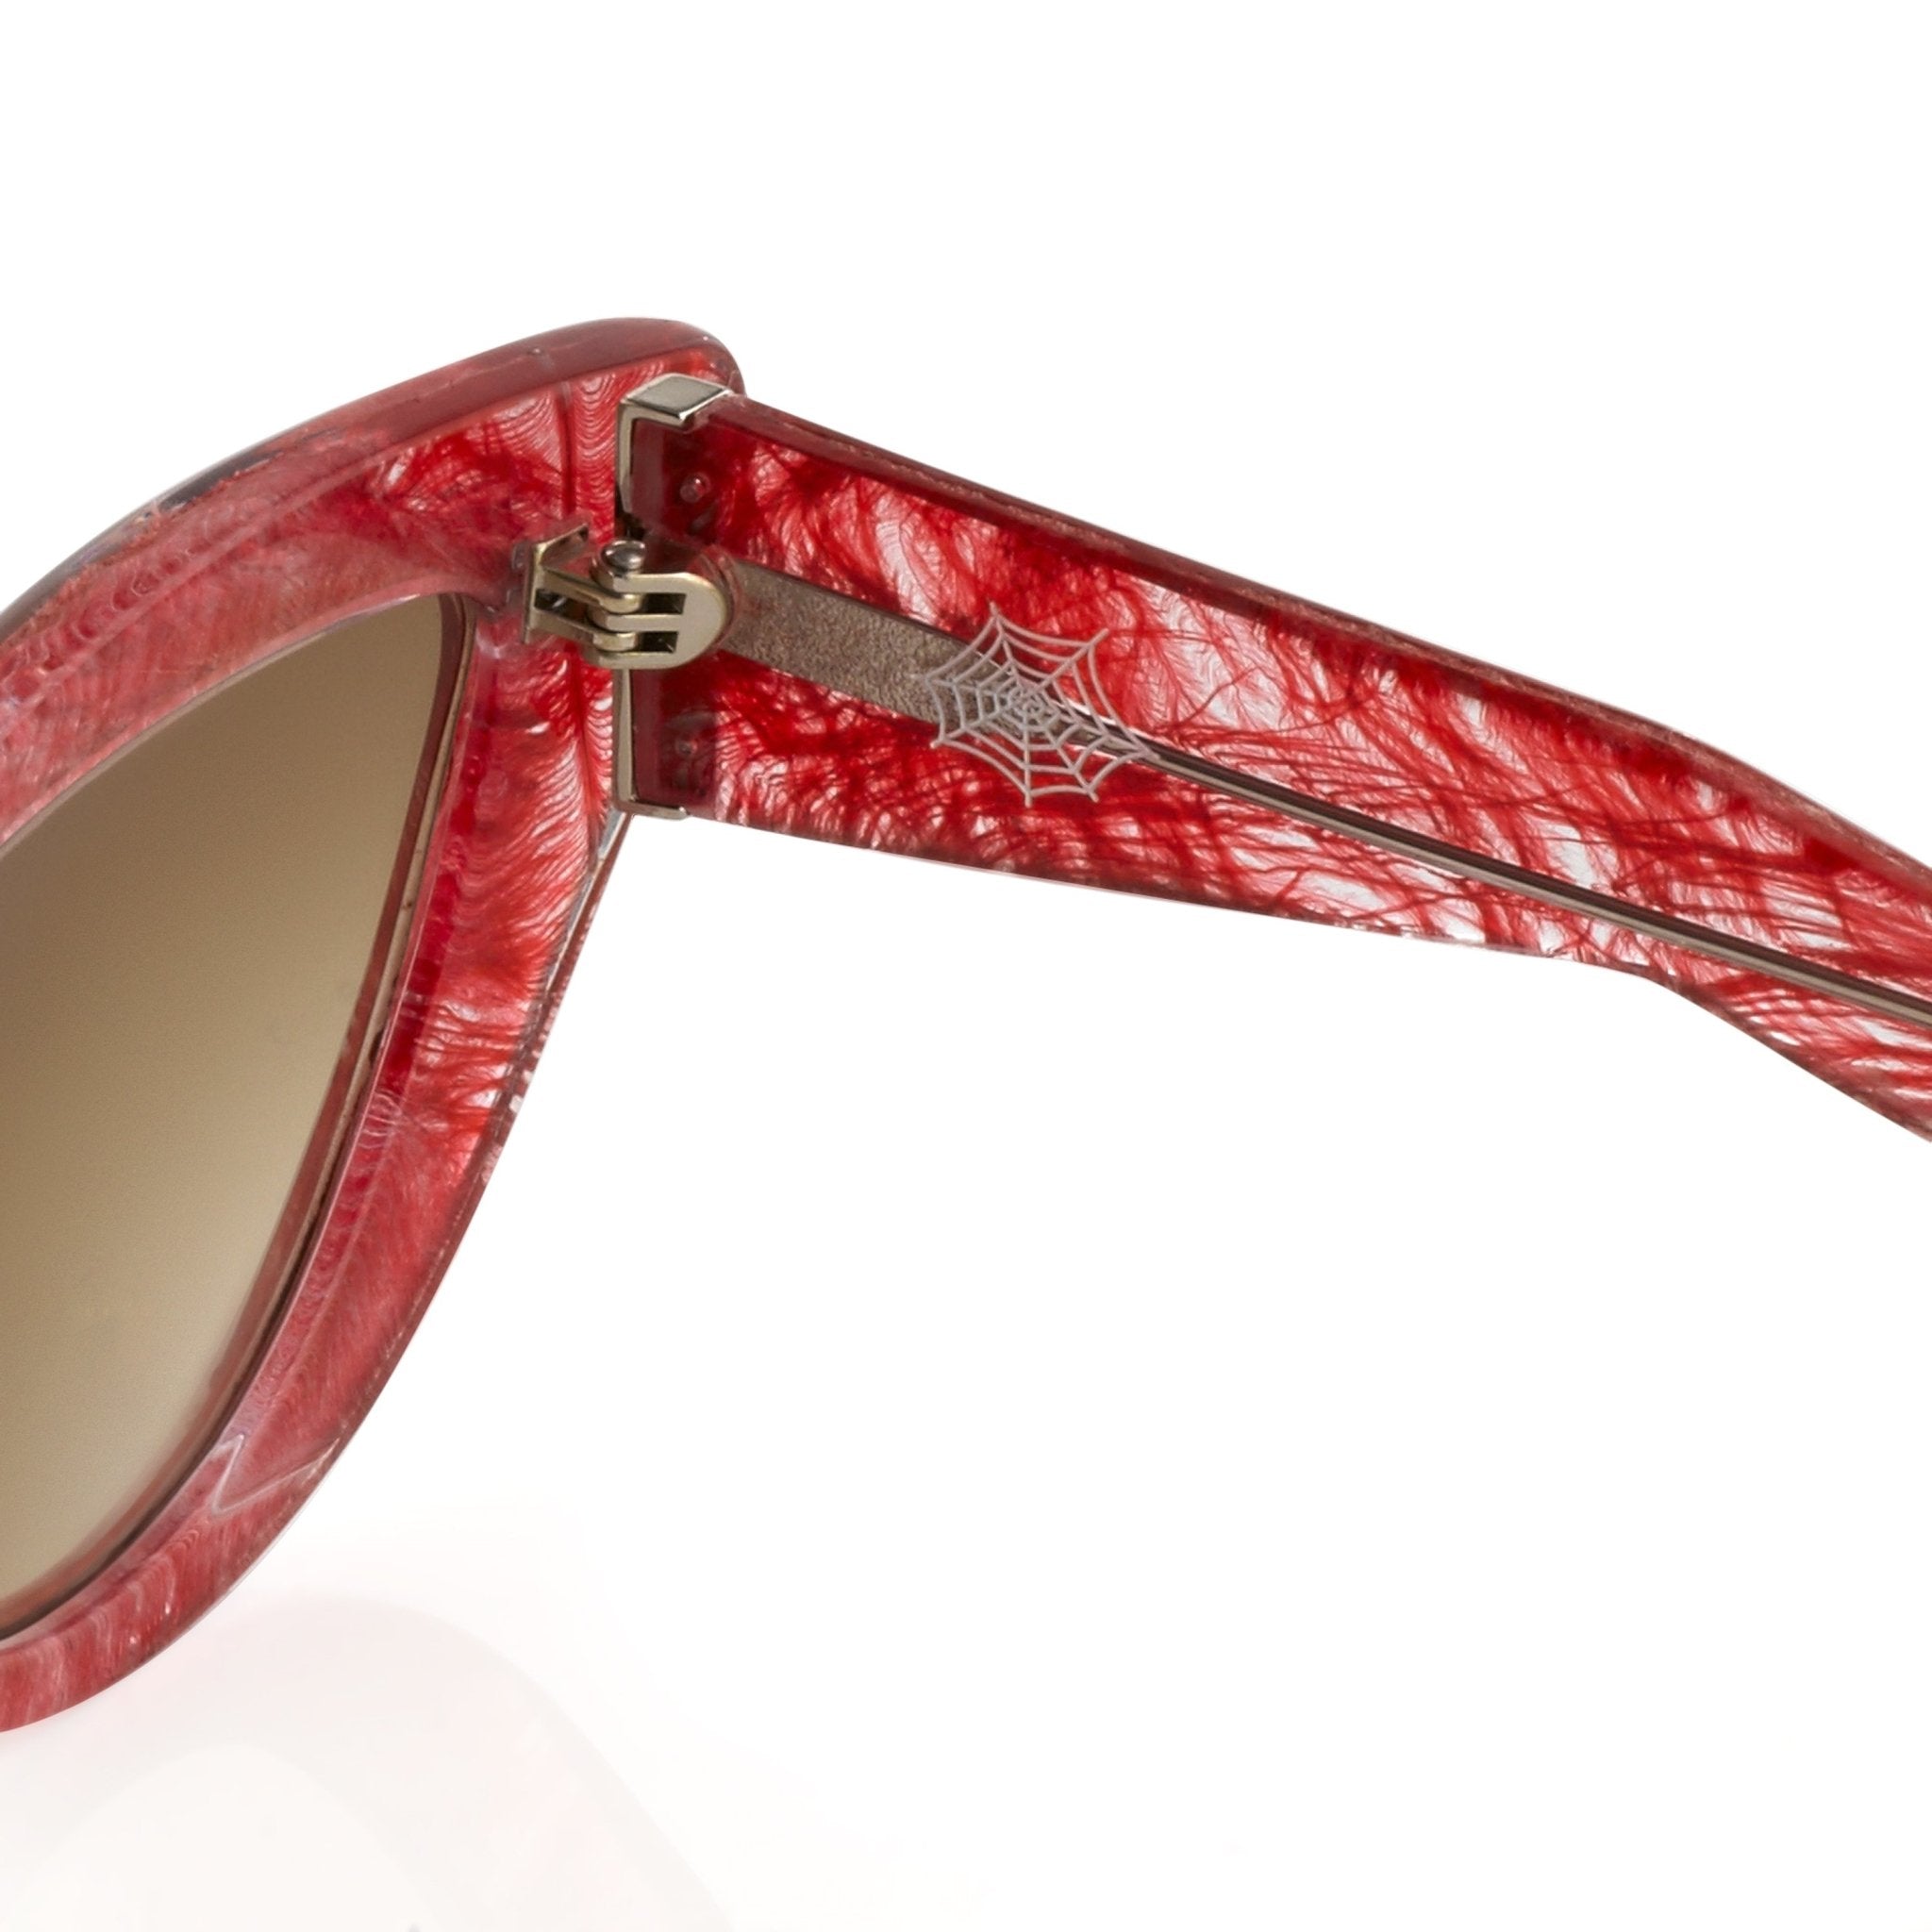 Charlotte Olympia Sunglasses Cat Eyes Red Clear Feather CO1C2SUN - Watches & Crystals